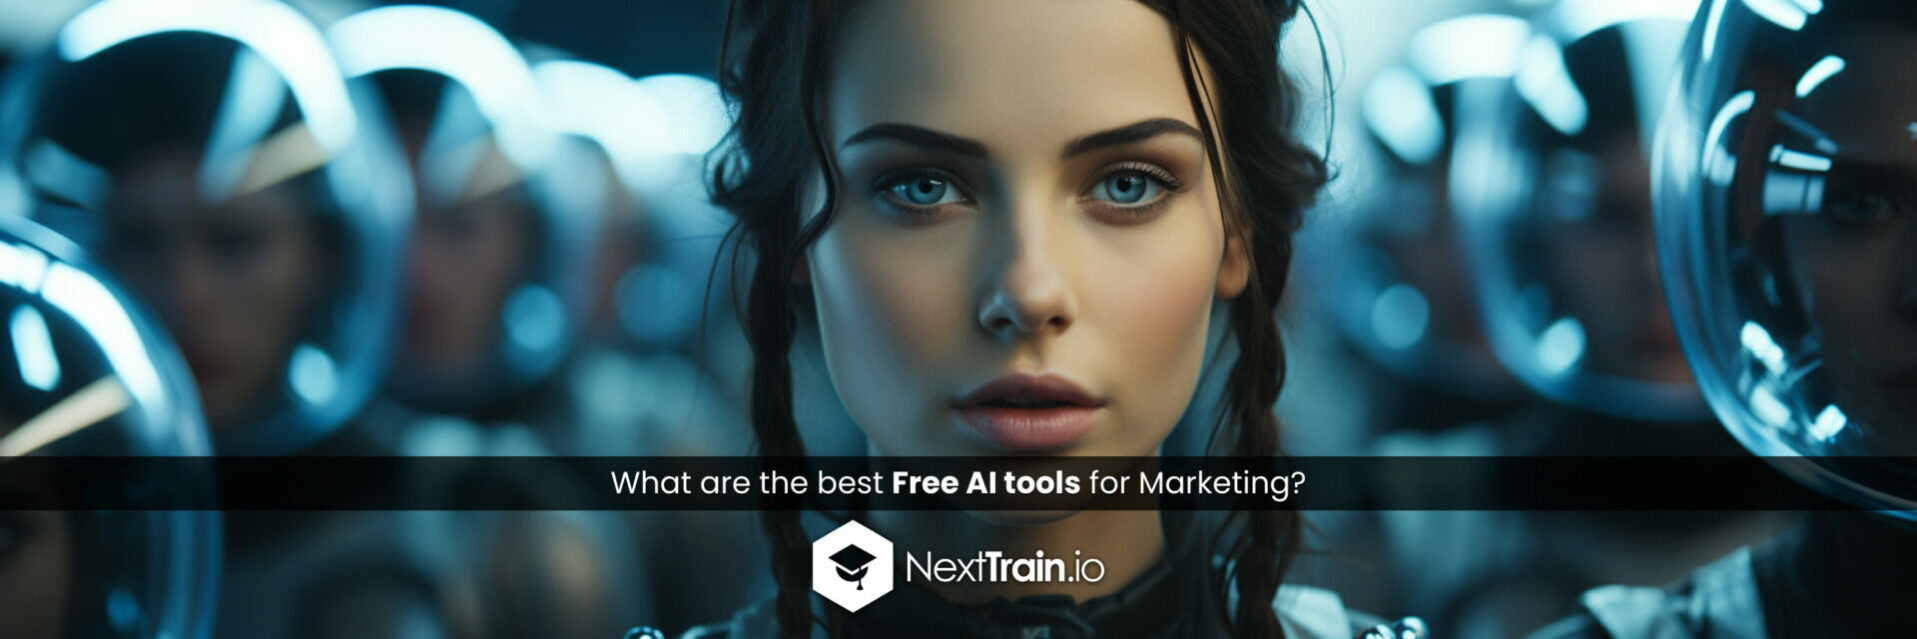 What are the best Free AI tools for Marketing?